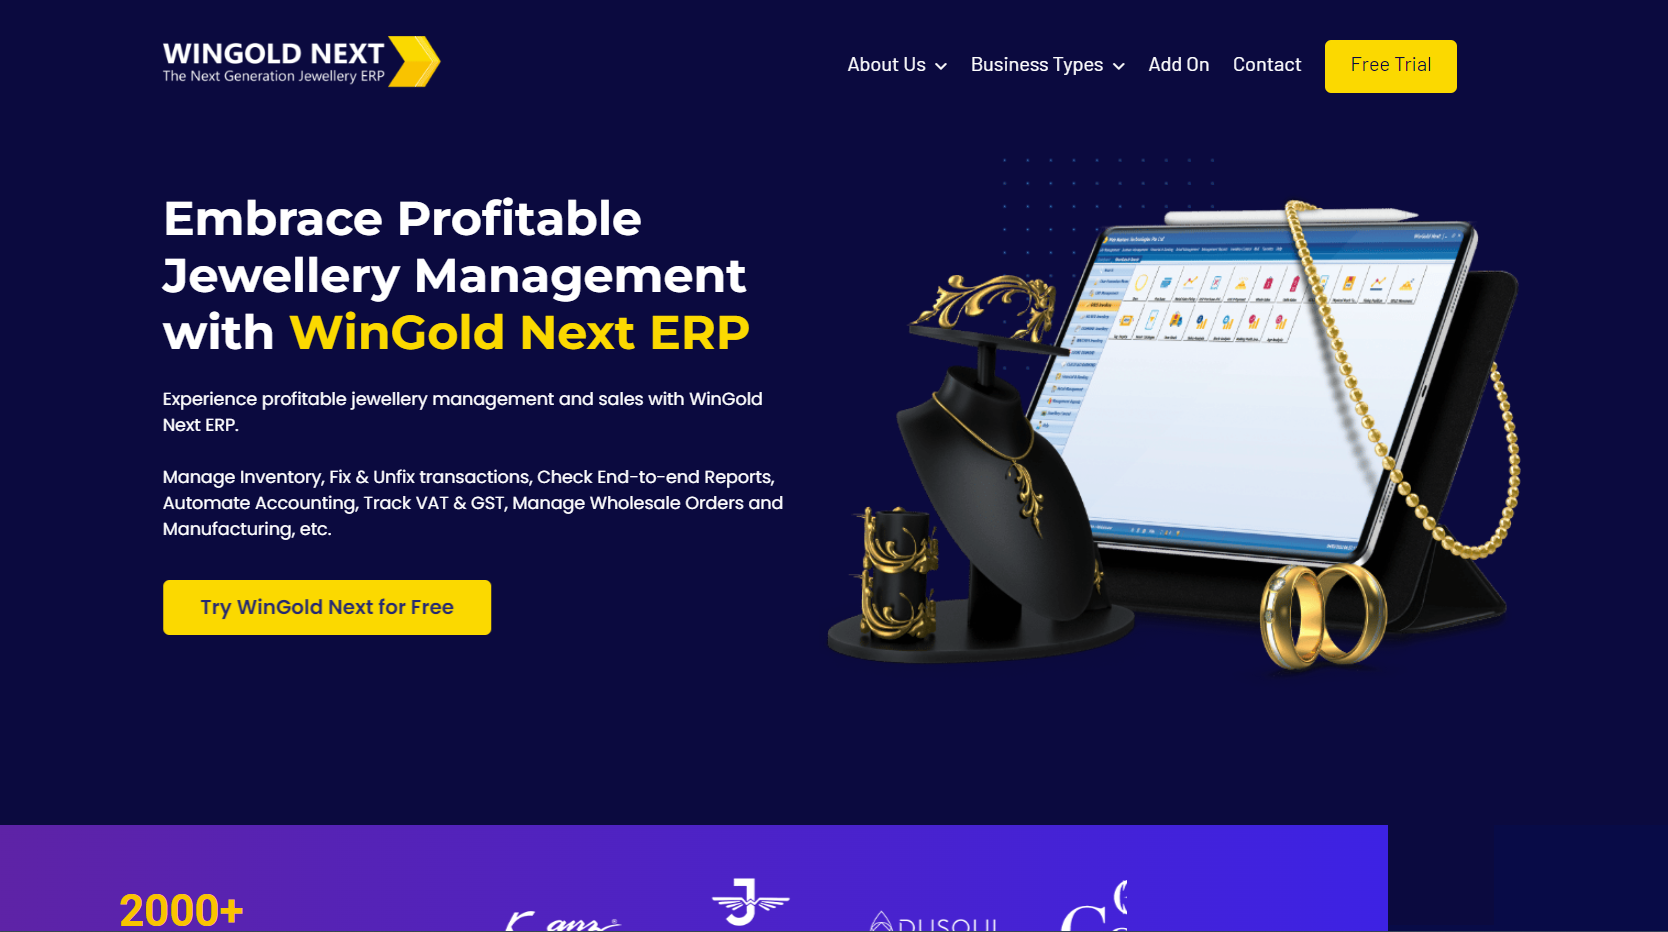 Wingold next jewellery software